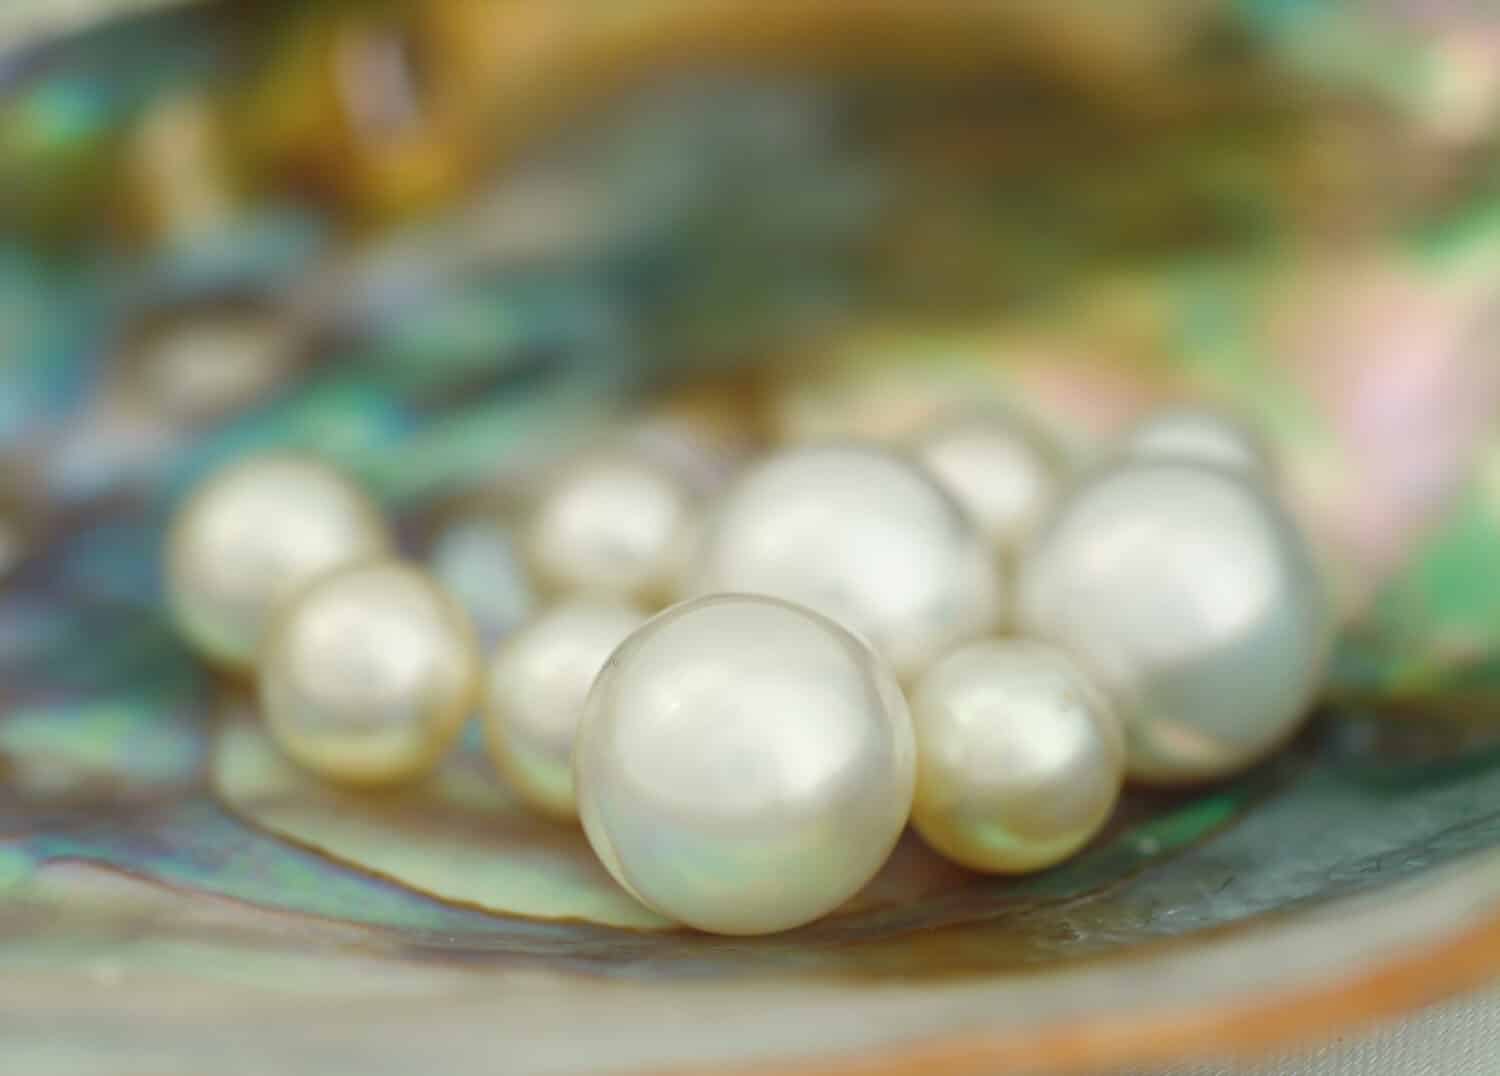 Different Pearl Types & Colors, The Four Major Types of Cultured Pearls